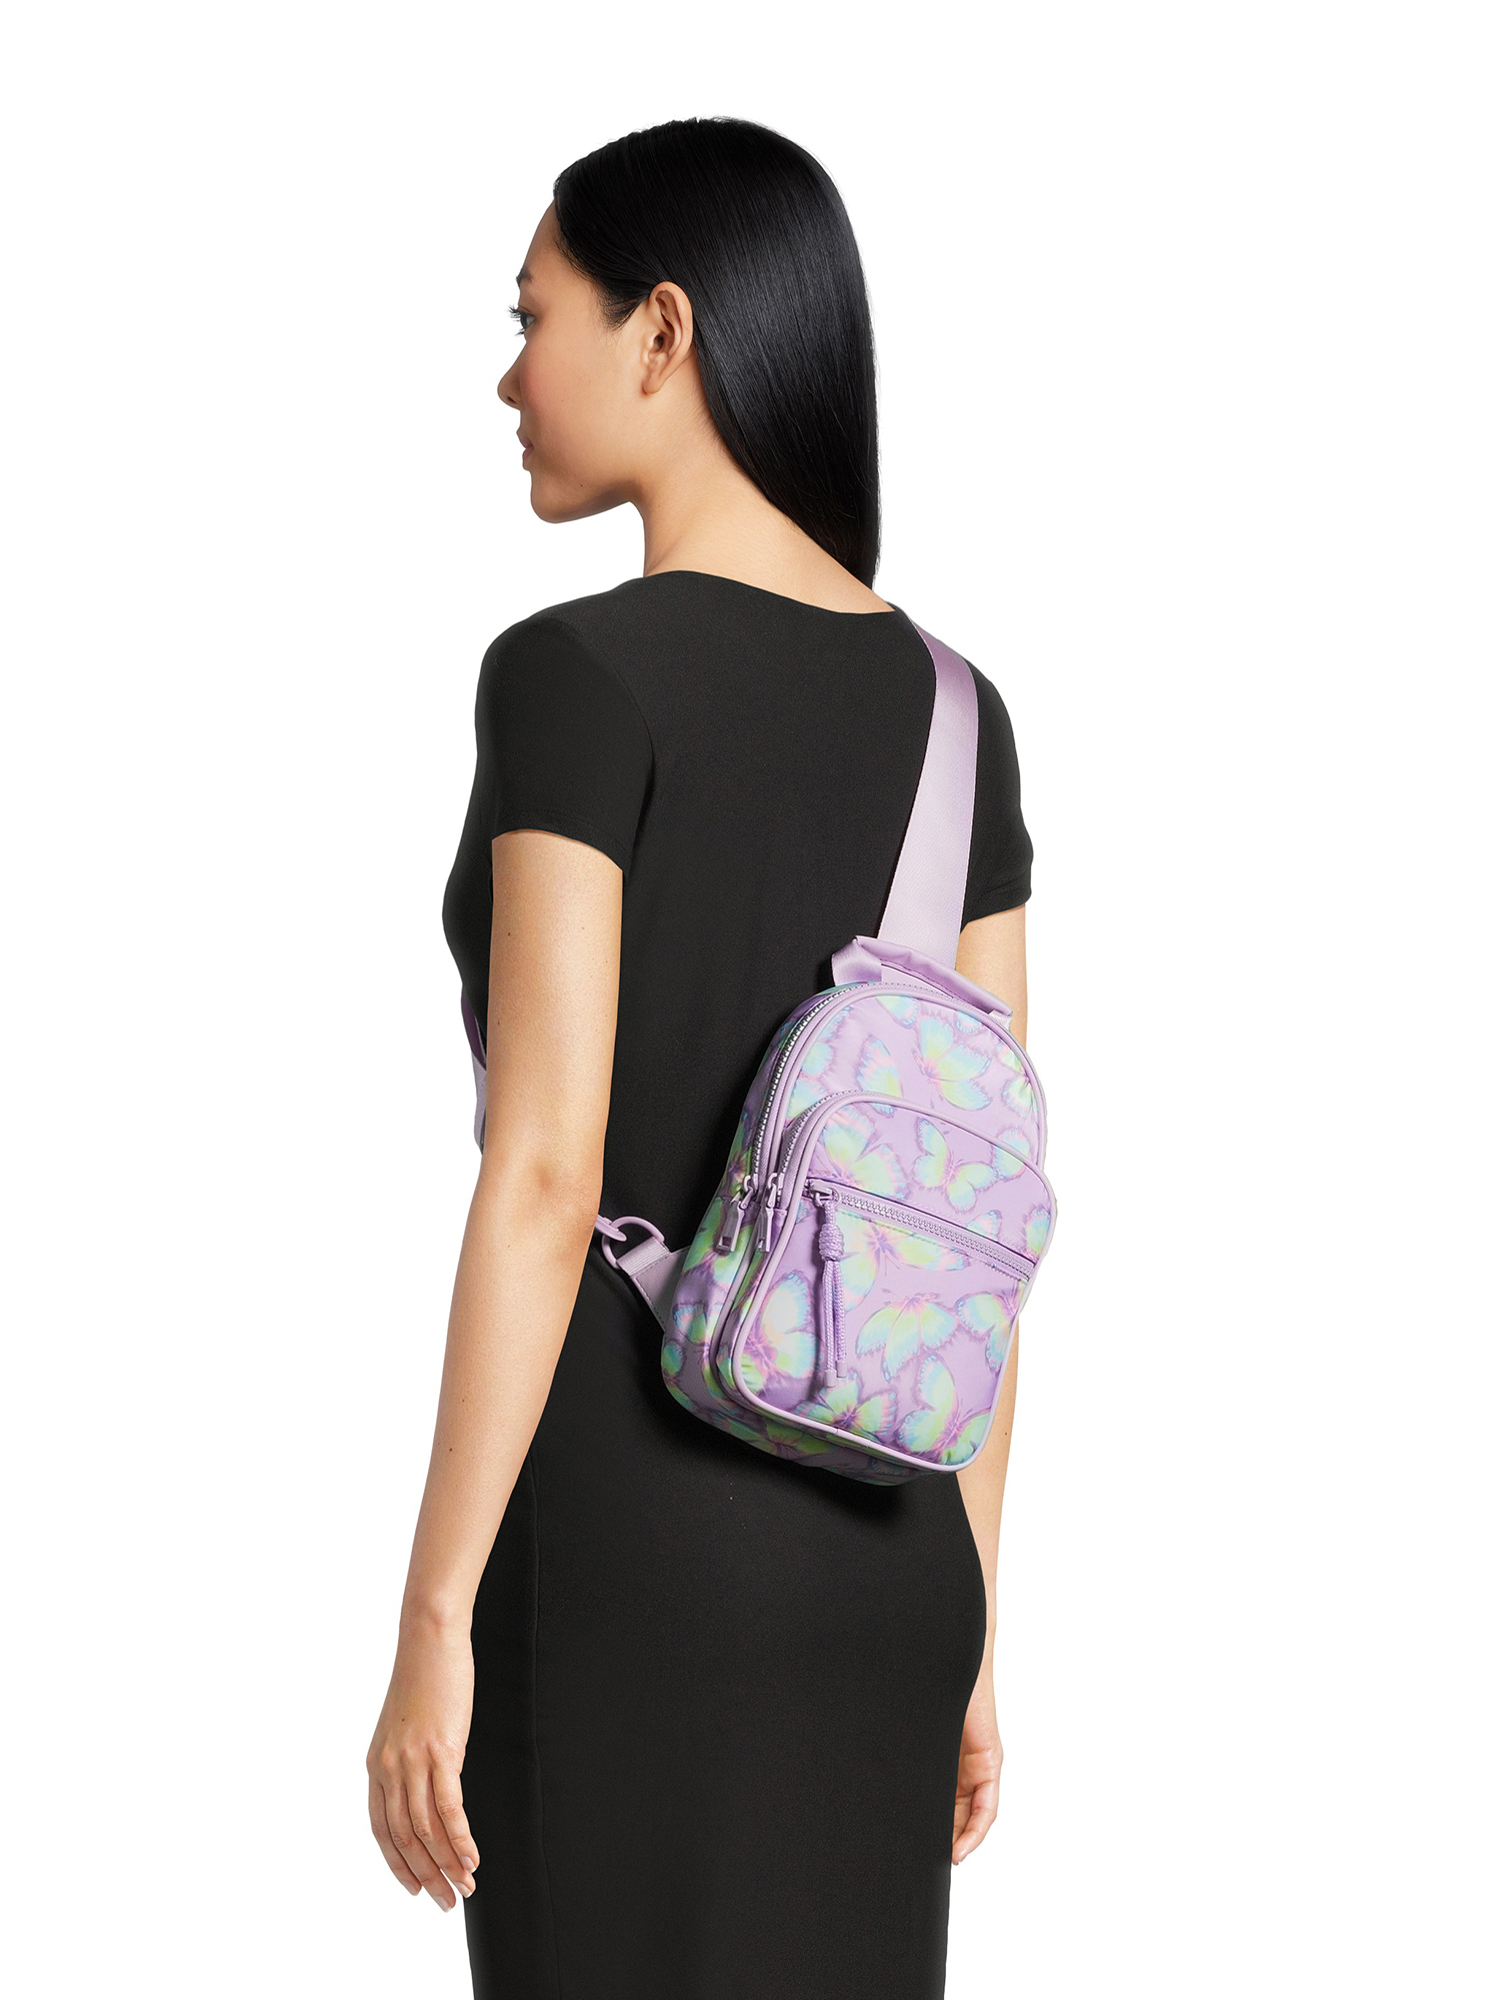 No Boundaries Women's Hands-Free Sling Bag, Lavender Butterfly - image 2 of 6